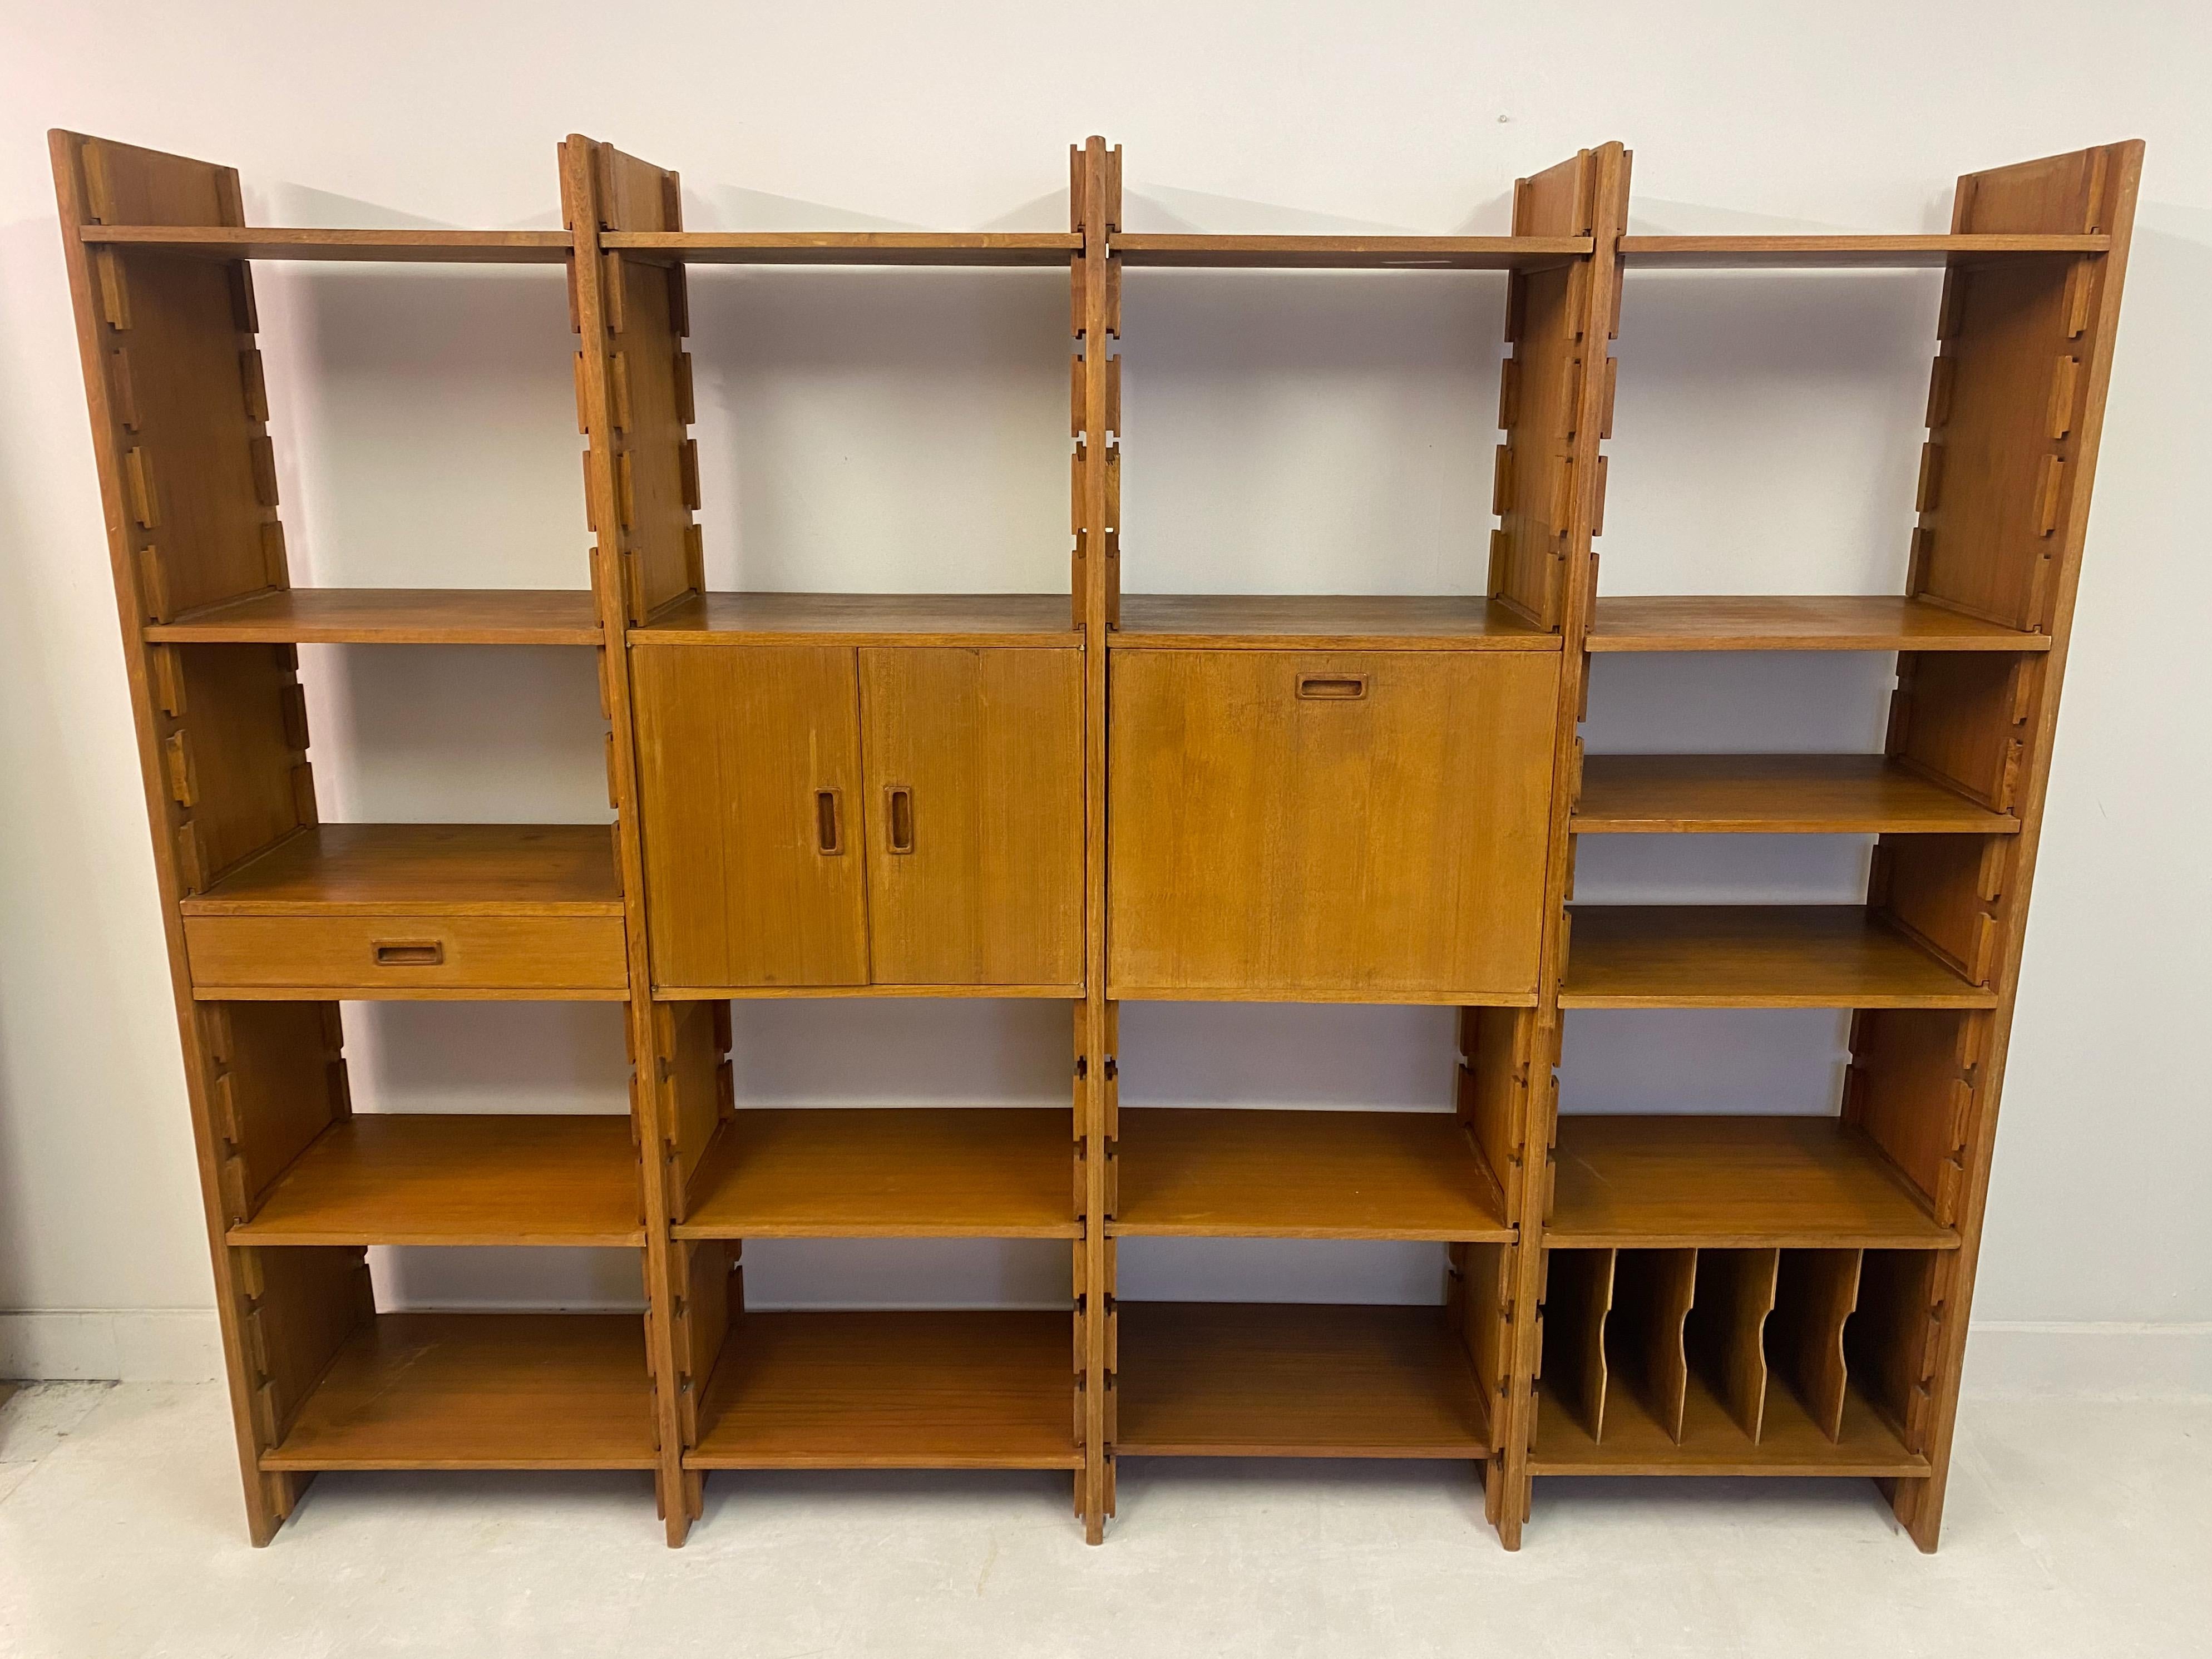 1960s, Italian Shelving Unit Bookcase In Good Condition In London, London